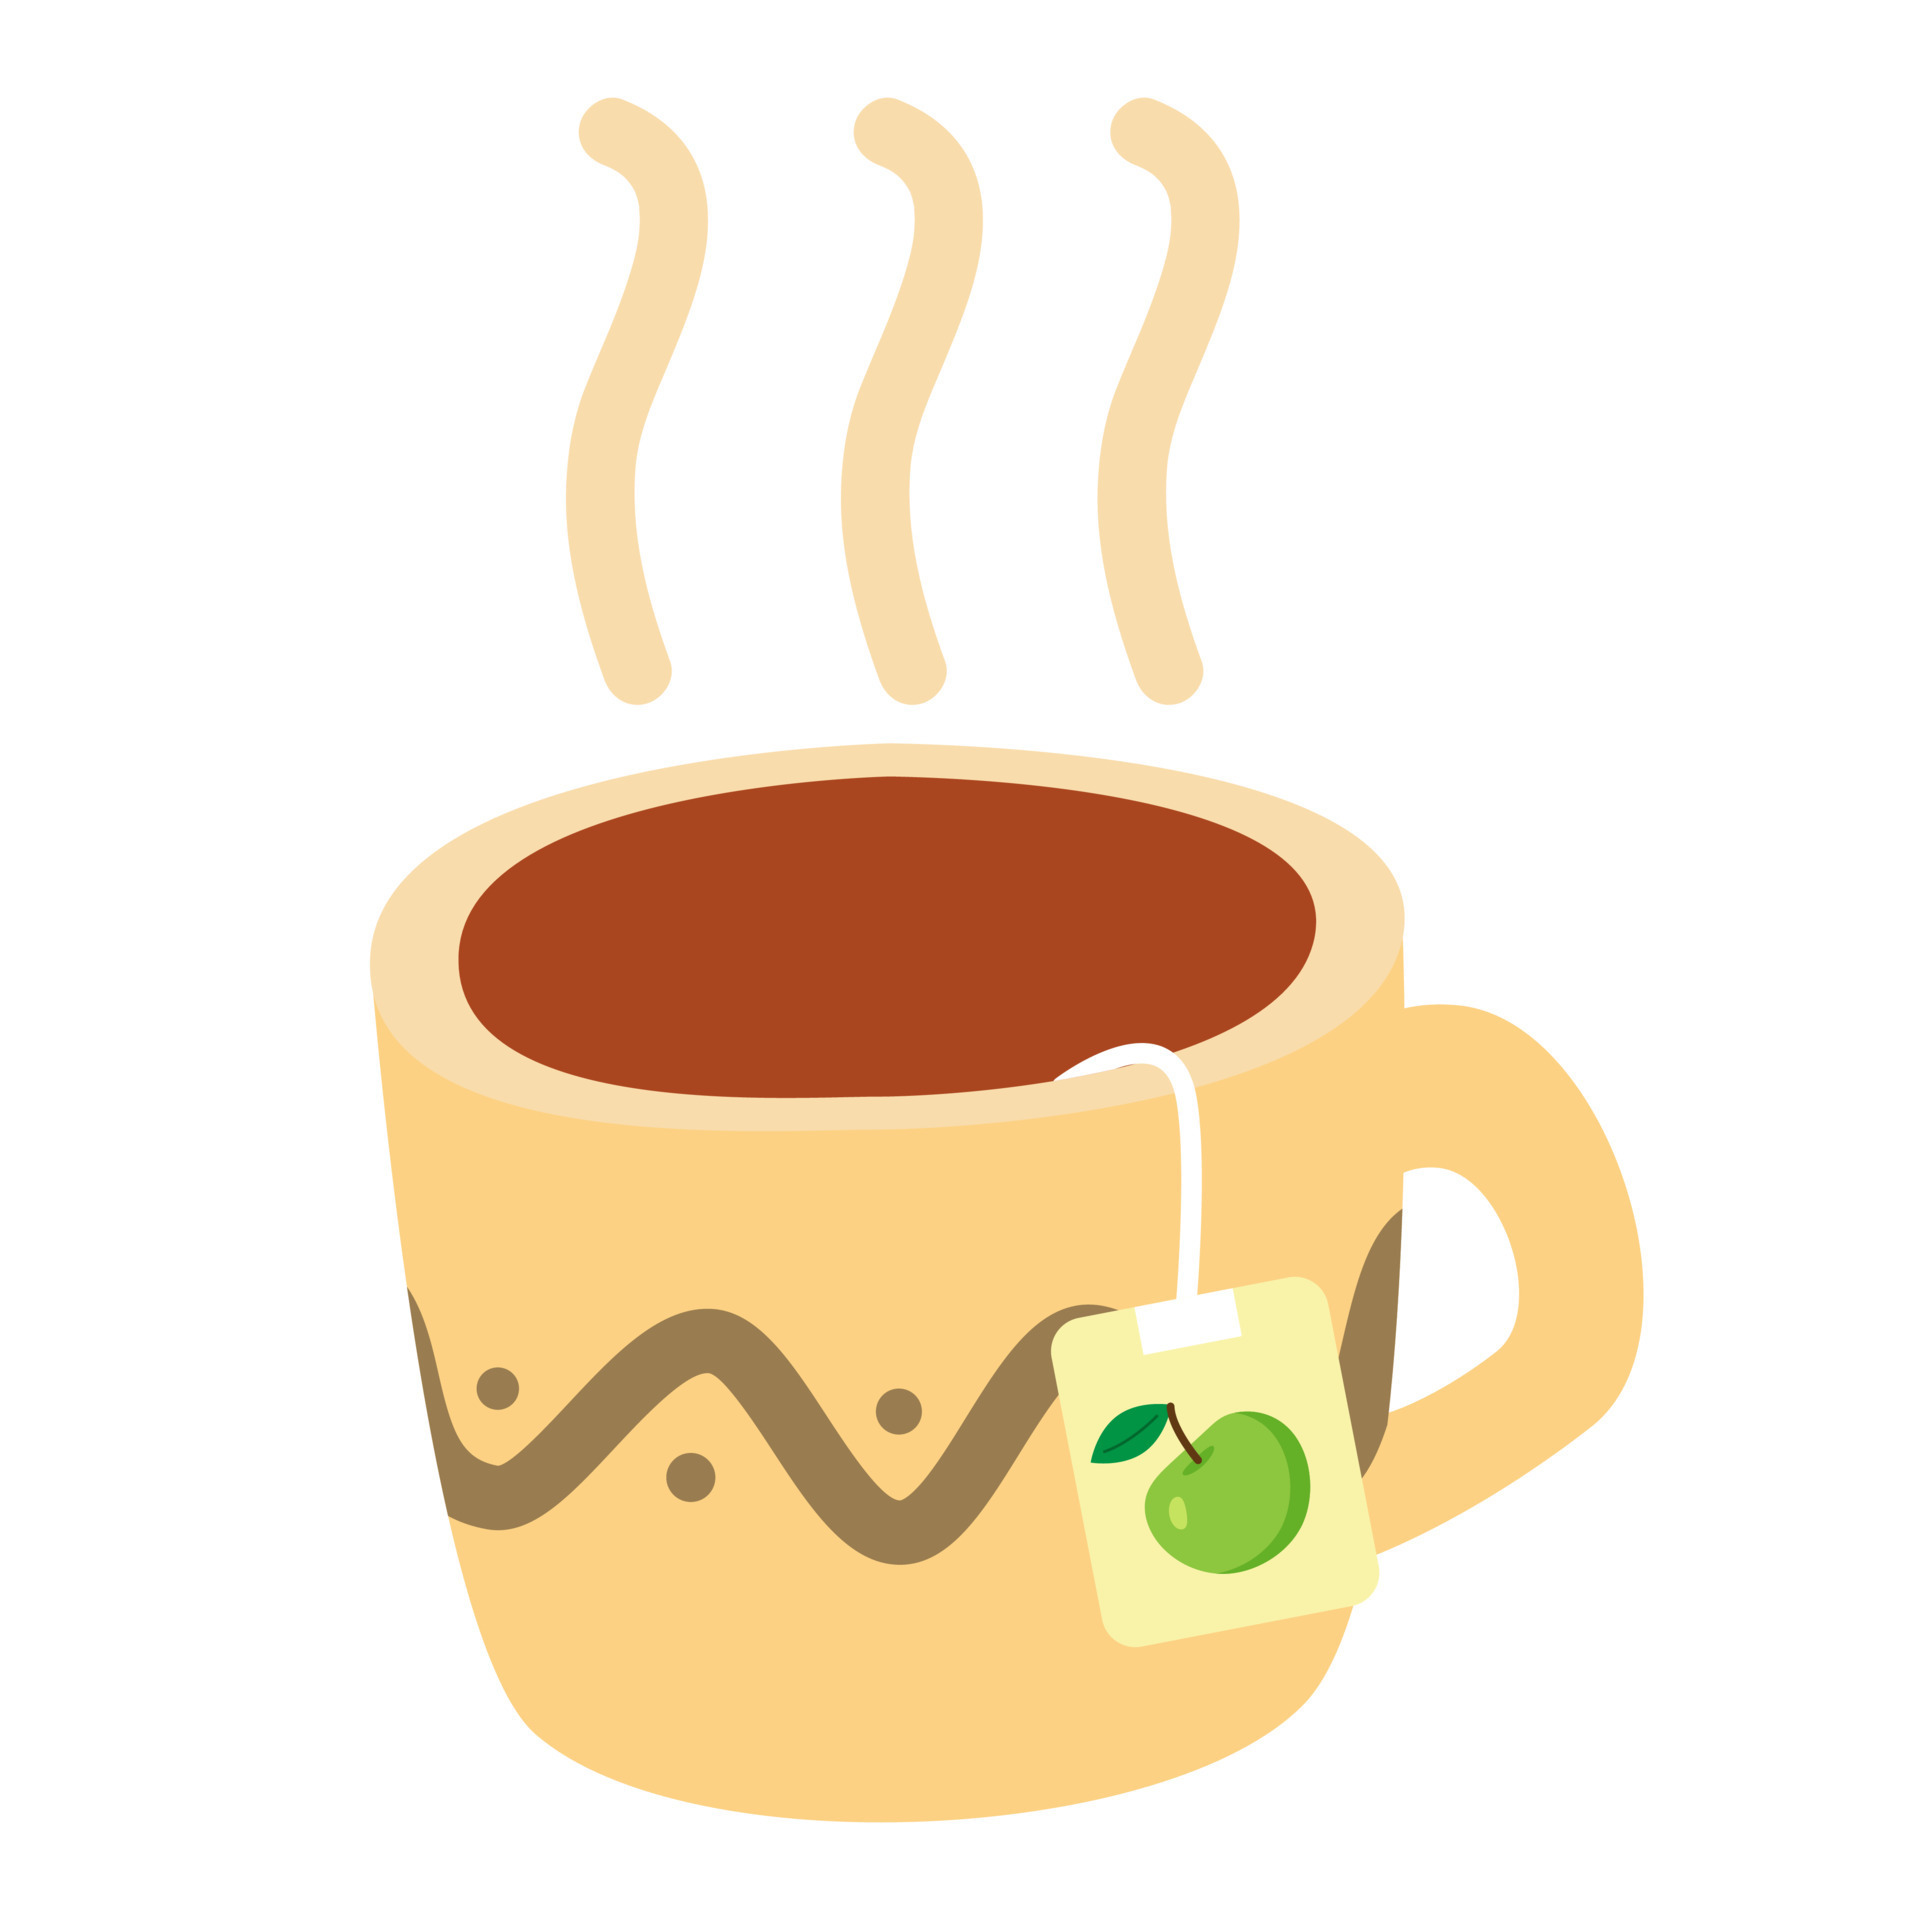 Funny cartoon mug with hot tea, cute vector illustration in flat style.  Beige, brown and green colors. Tea bag with apple taste. Autumn hot drink,  cozy style print. Cup of herbal tea